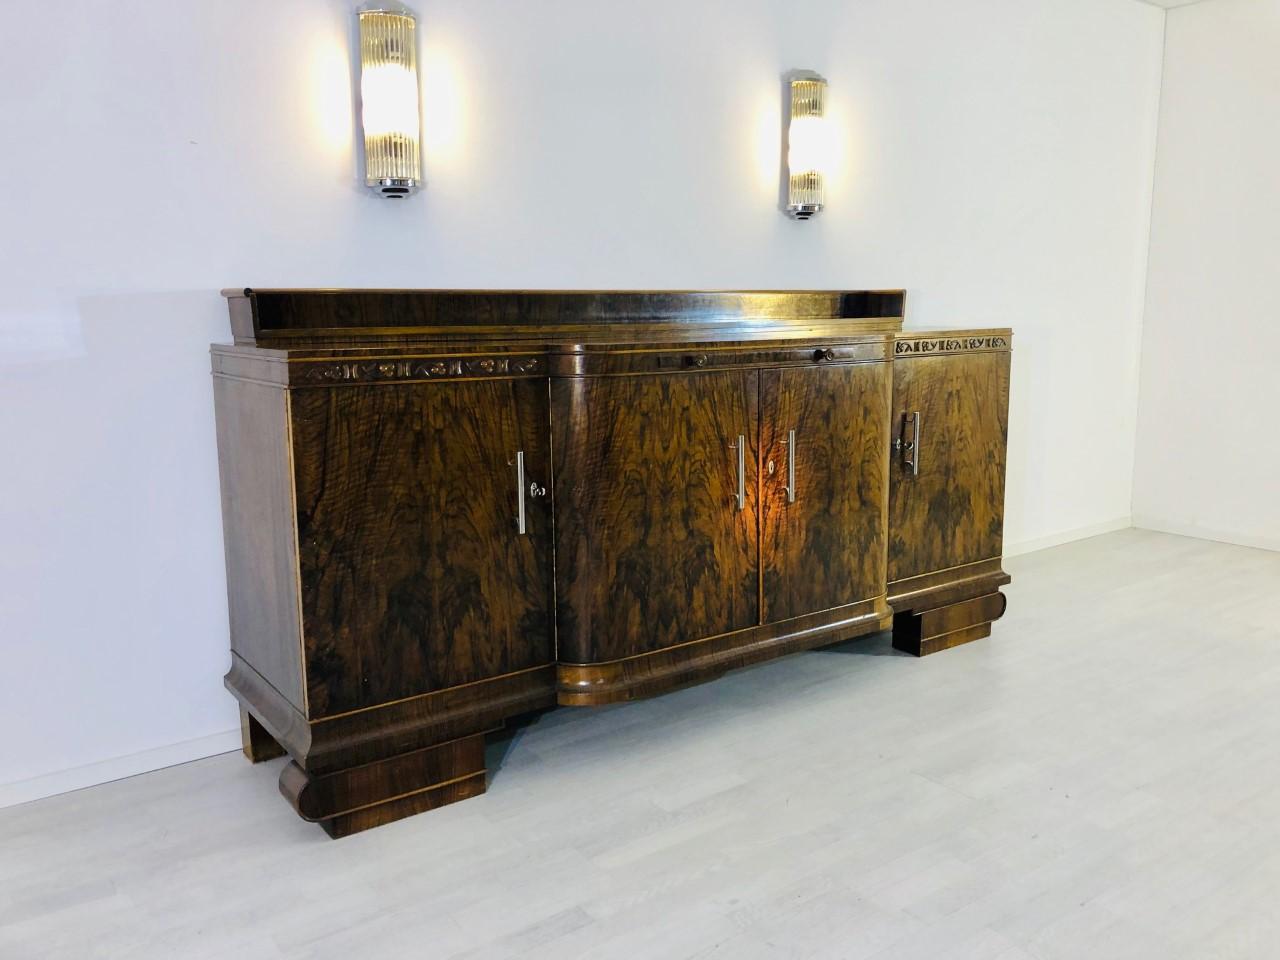 Large and classic original Art Deco sideboard or buffet made of luxurious, dark walnut wood. Offers unique cherry ornamentation around the top plate (107cm height), a huge hutch (120cm height), as well as a serving extension made of oak wood. This